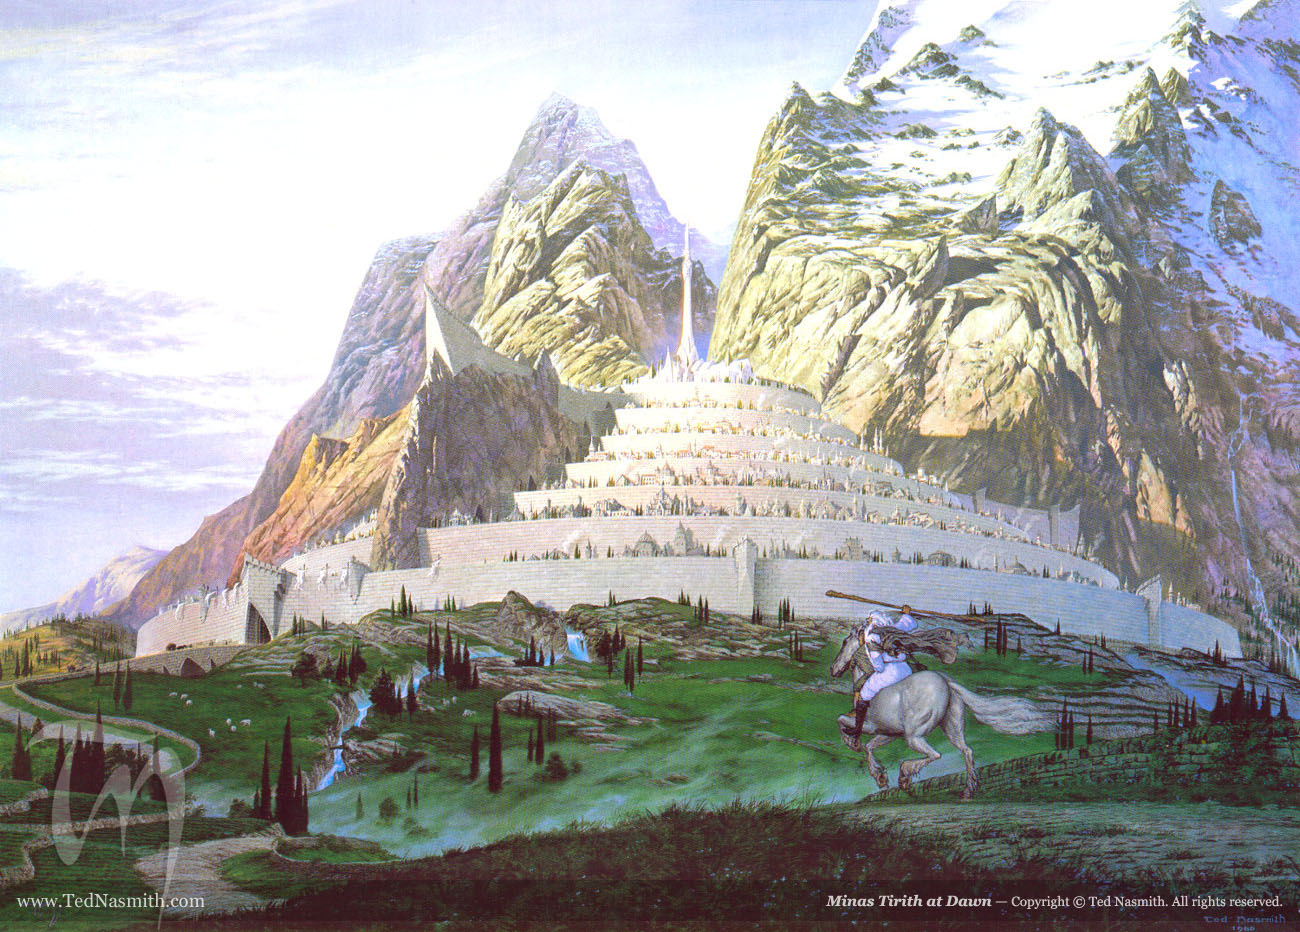 Lord of the Rings Wallpaper: Minas Tirith  Lord of the rings, Fantasy  landscape, Minas tirith